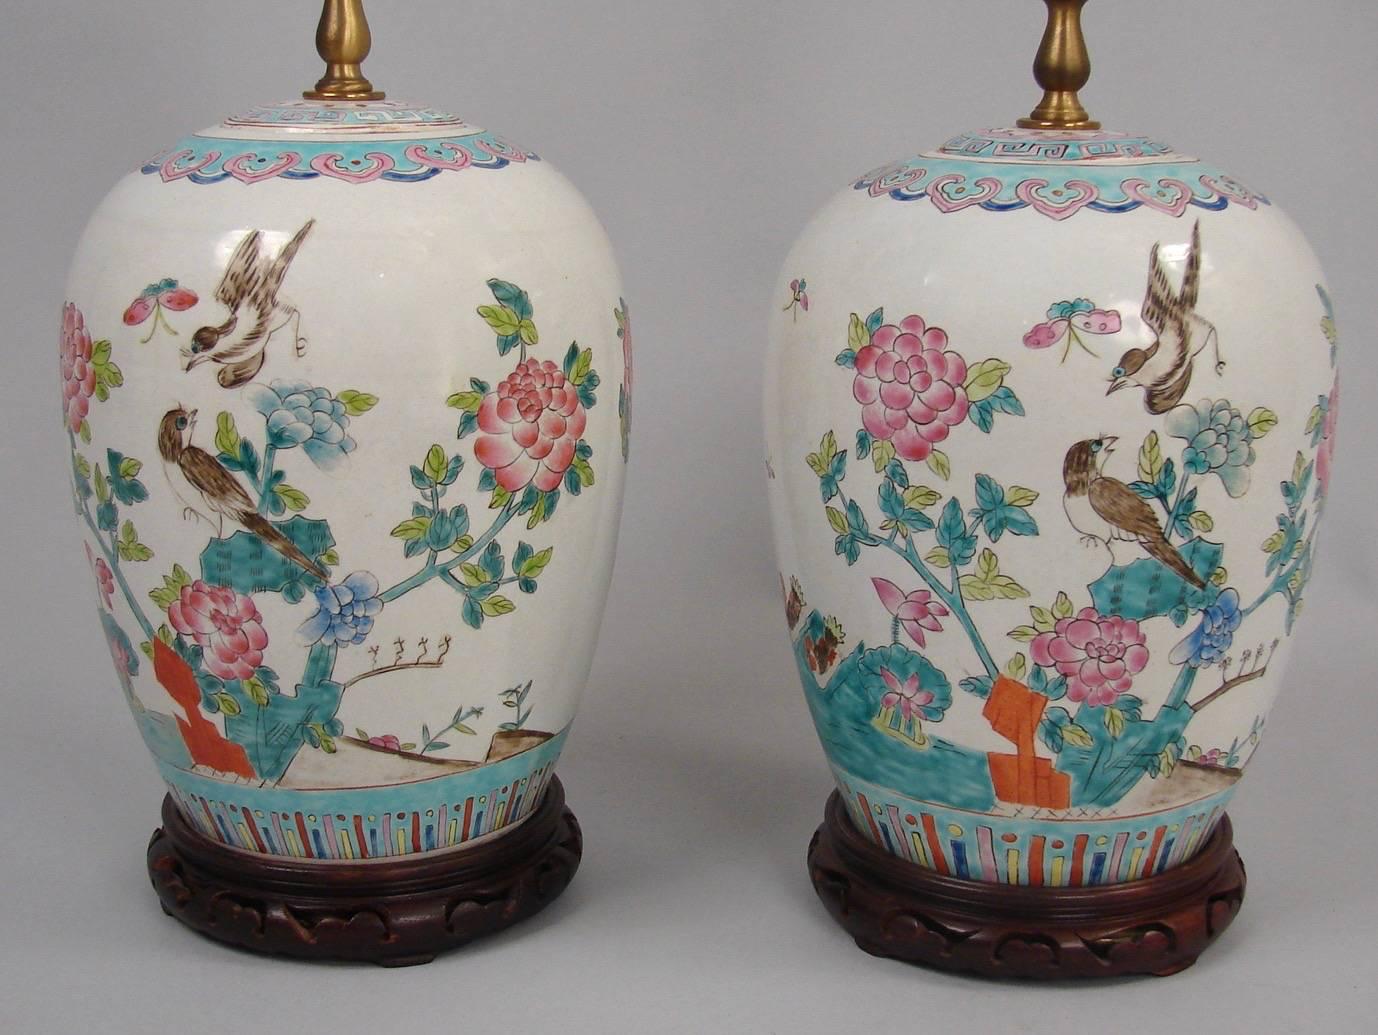 A pair of Chinese vases decorated with Phoenix birds in a naturalistic setting in tones of blue and rose, 20th century. New shades included.